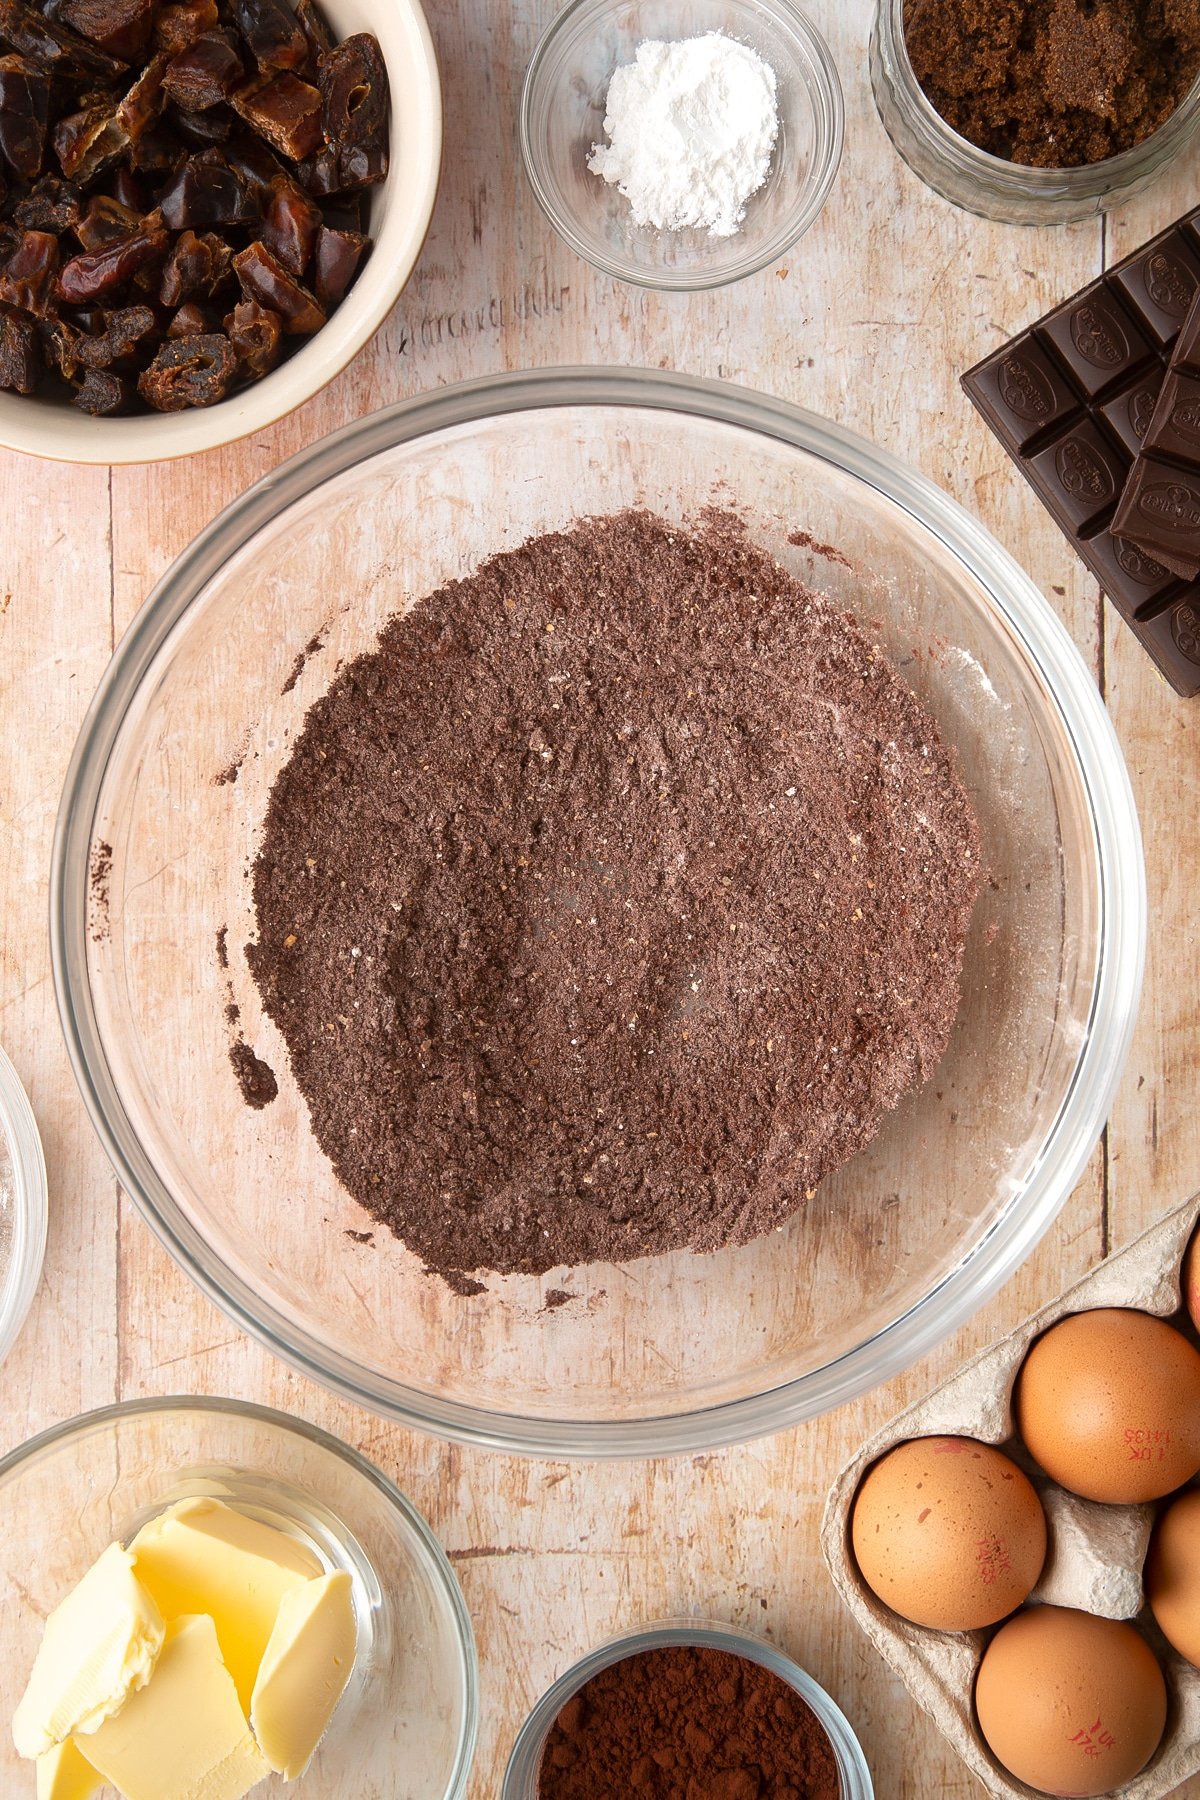 A mixing bowl containing cocoa, wholemeal flour and baking powder, whisked together. Ingredients to make whole grain brownies surround the bowl.